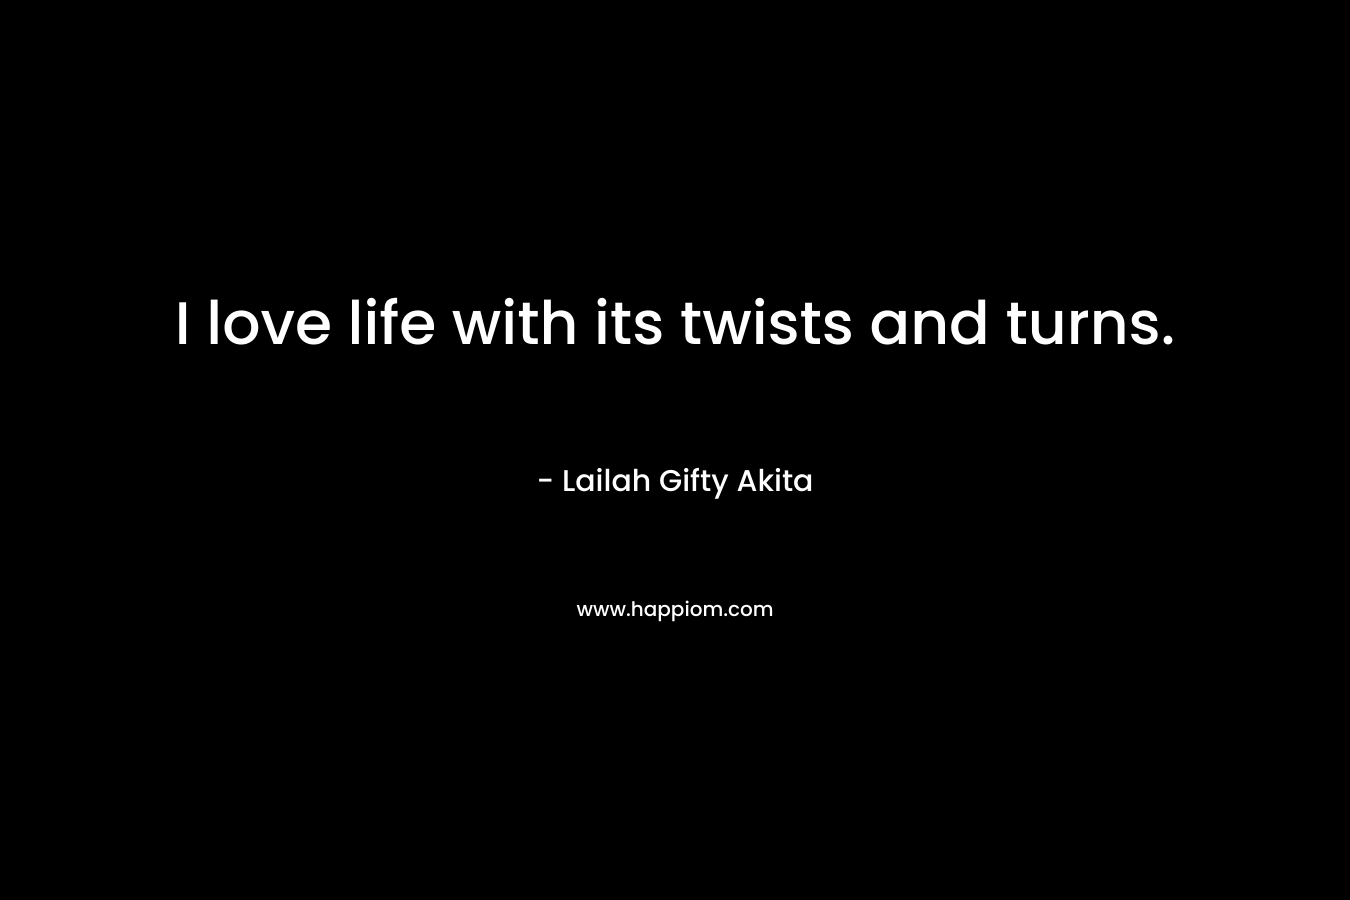 I love life with its twists and turns.